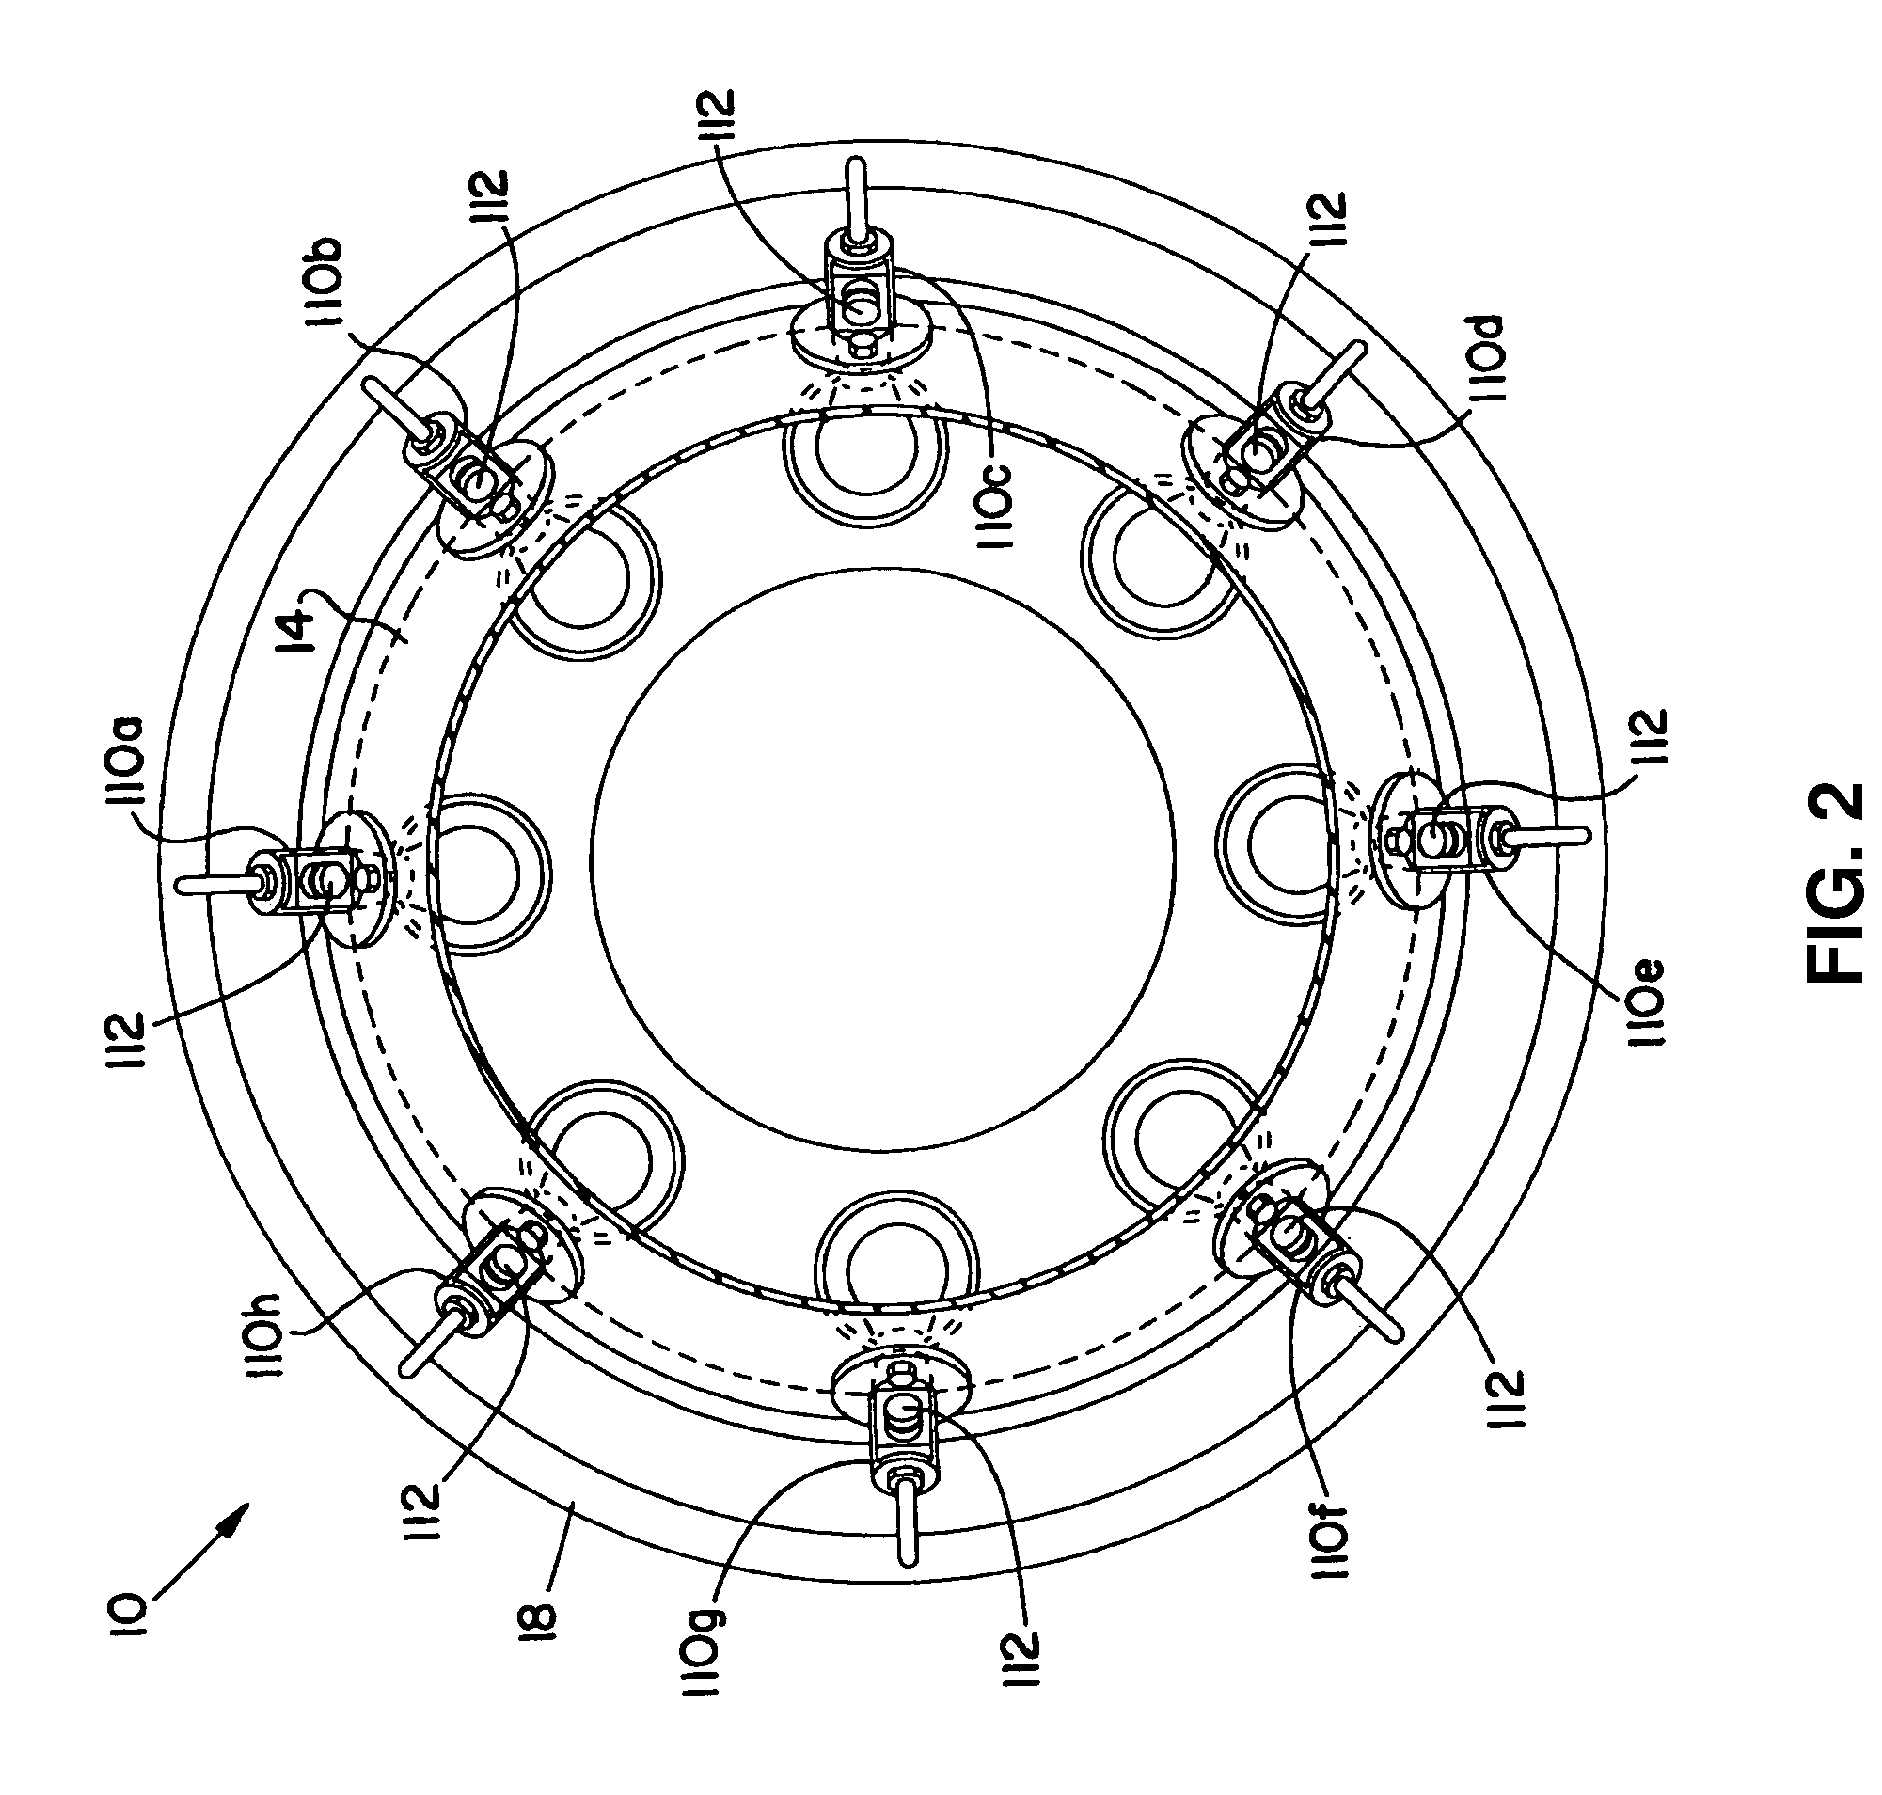 Variable amplitude double binary valve system for active fuel control